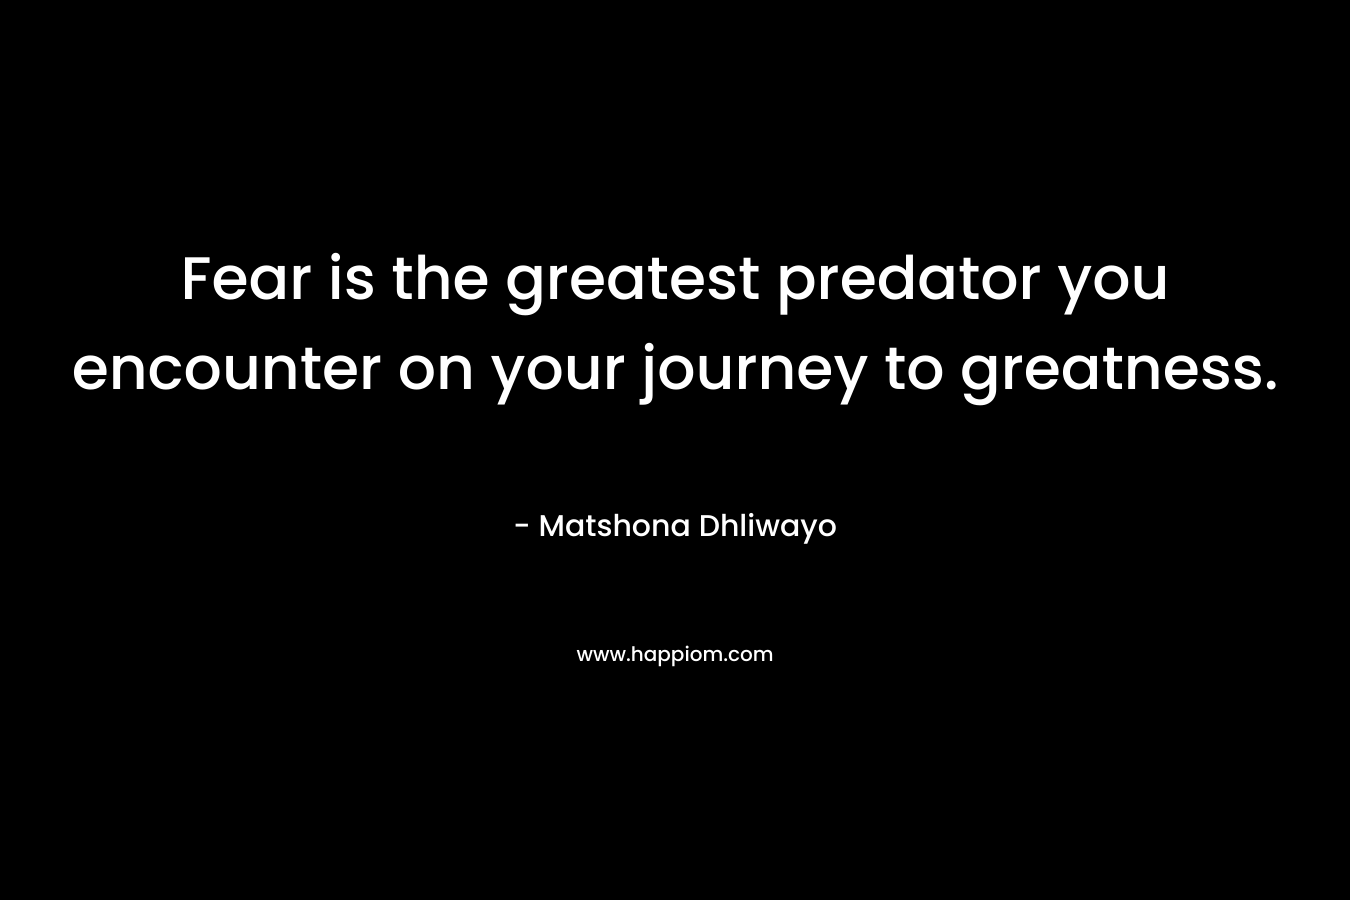 Fear is the greatest predator you encounter on your journey to greatness. – Matshona Dhliwayo